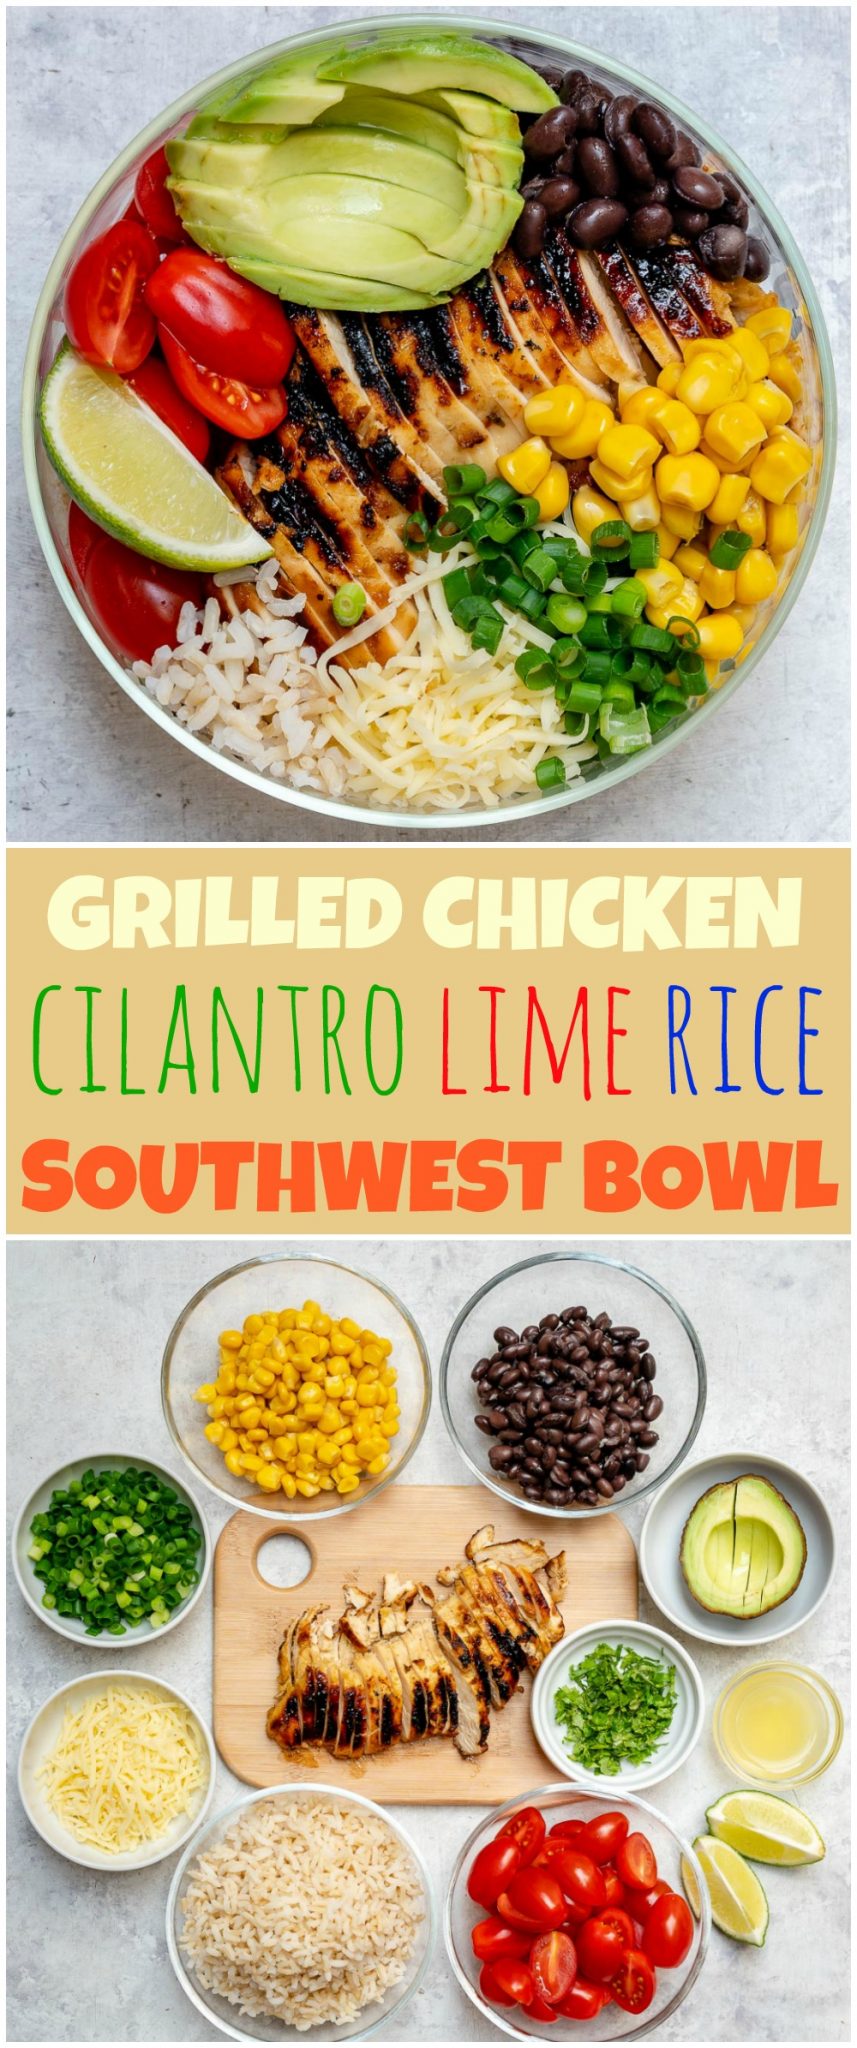 Eat Clean Southwest Grilled Chicken Bowl